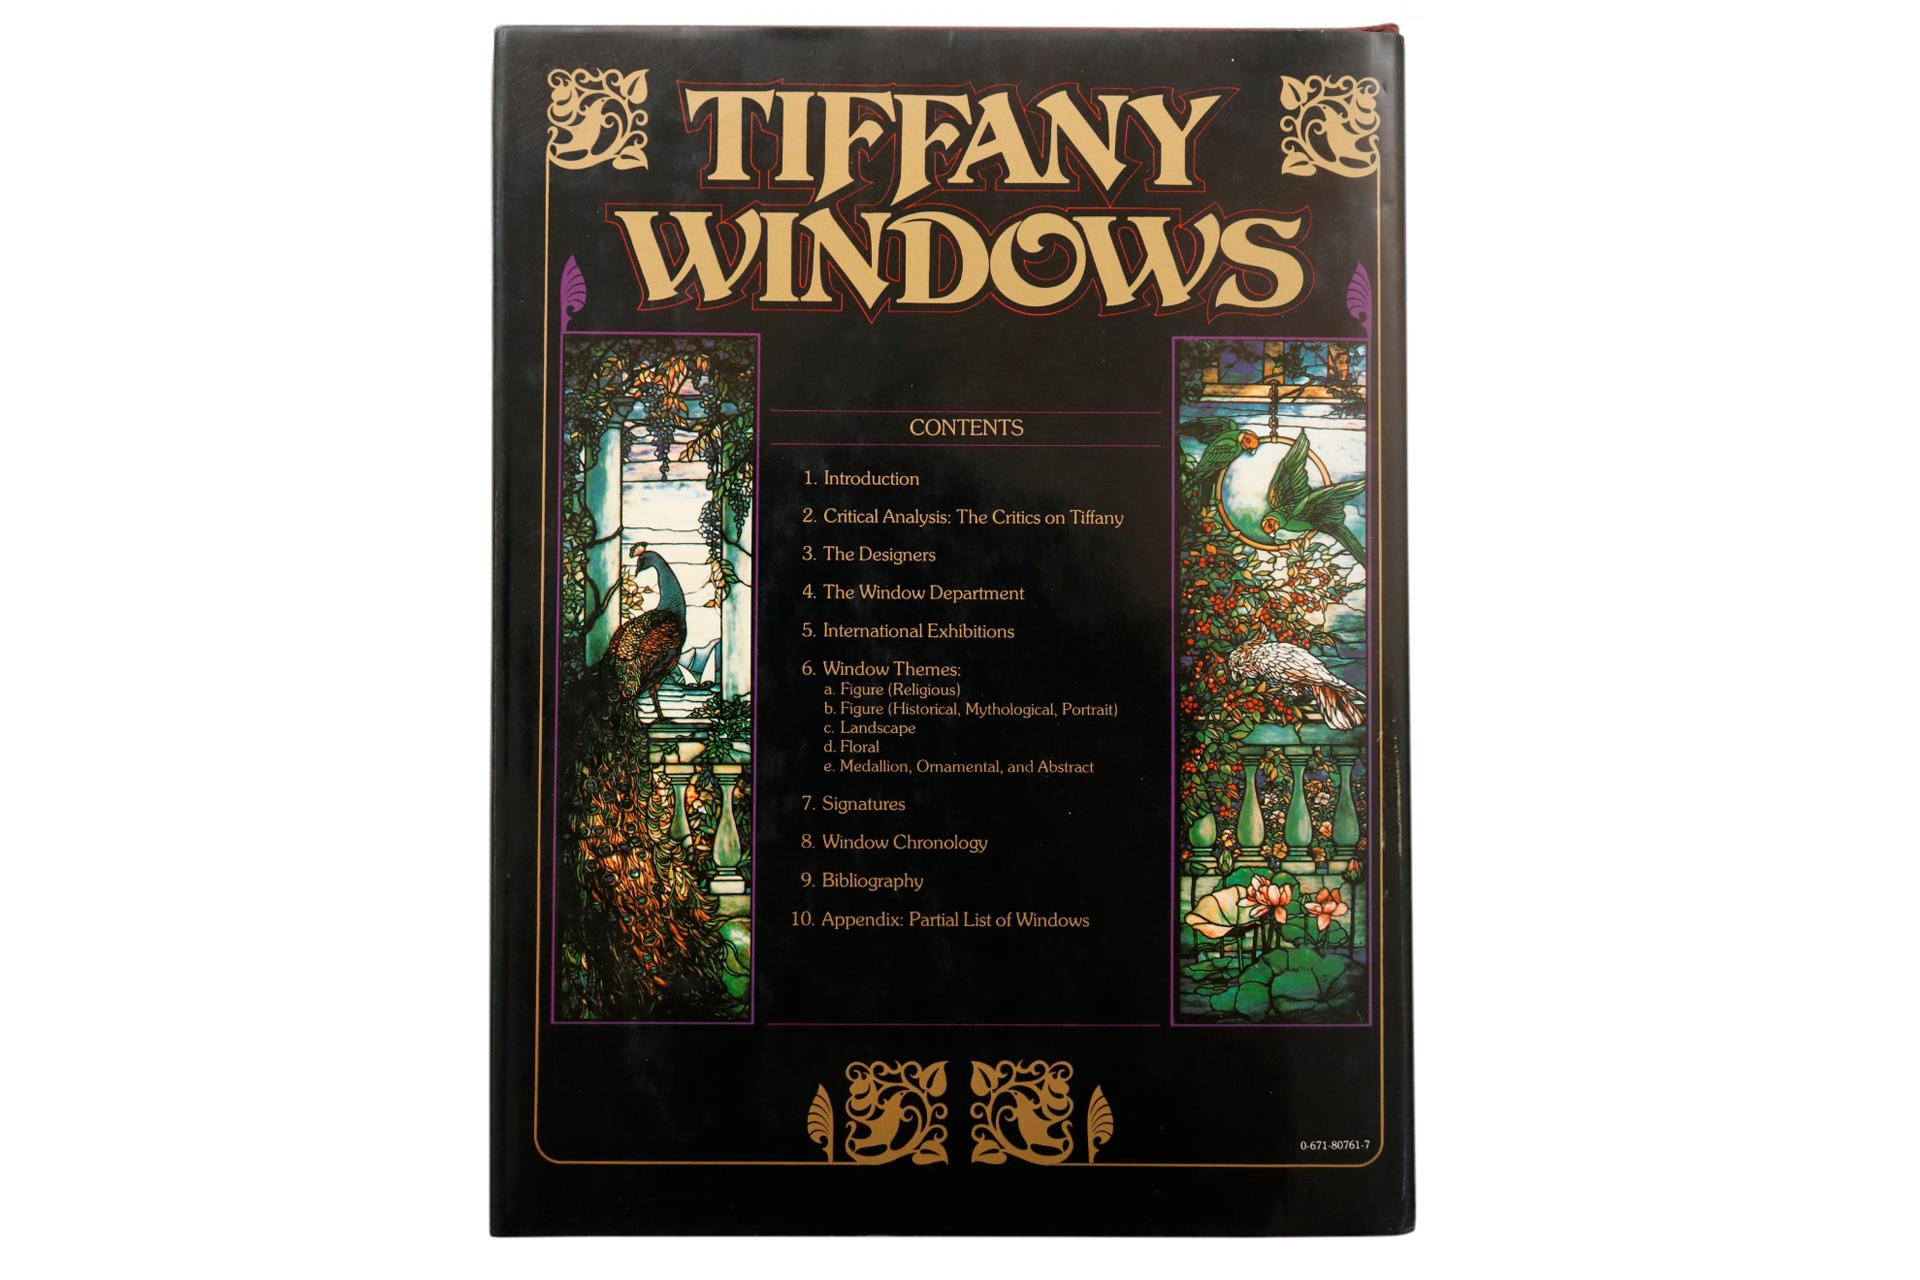 Tiffany Windows by Alastair Duncan. Hardcover book with dustjacket, published in 1982 by Simon and Schuster of New York. Printed and bound in Italy by Arnoldo Mondadori of Verona. 224 pages with 230 illustrations, 114 in color.